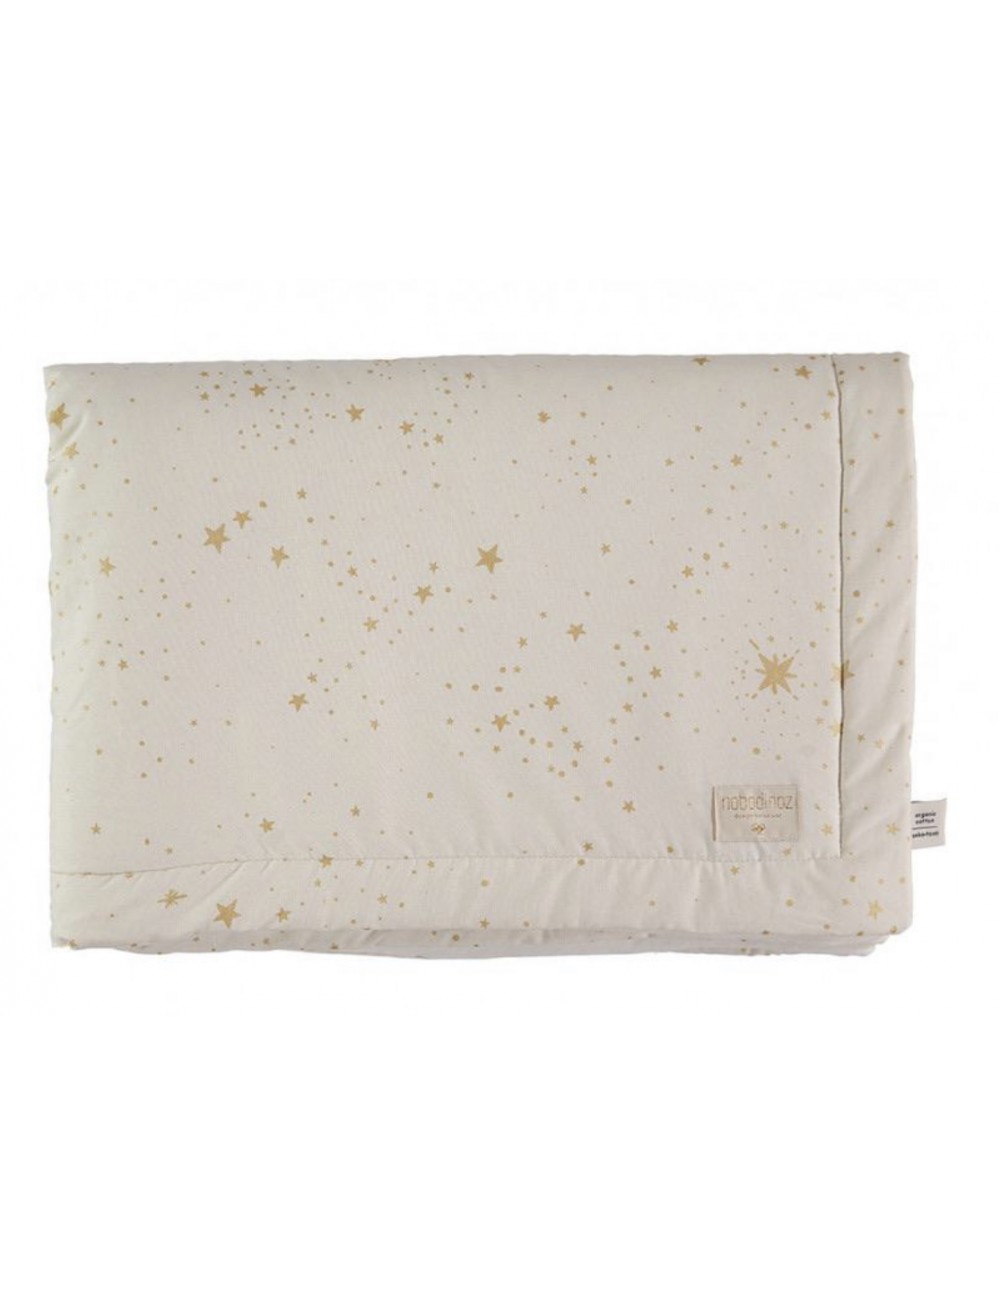 COUVERTURE LAPONIA BLANKET SMALL 140X100 GOLD STELLA NATURAL